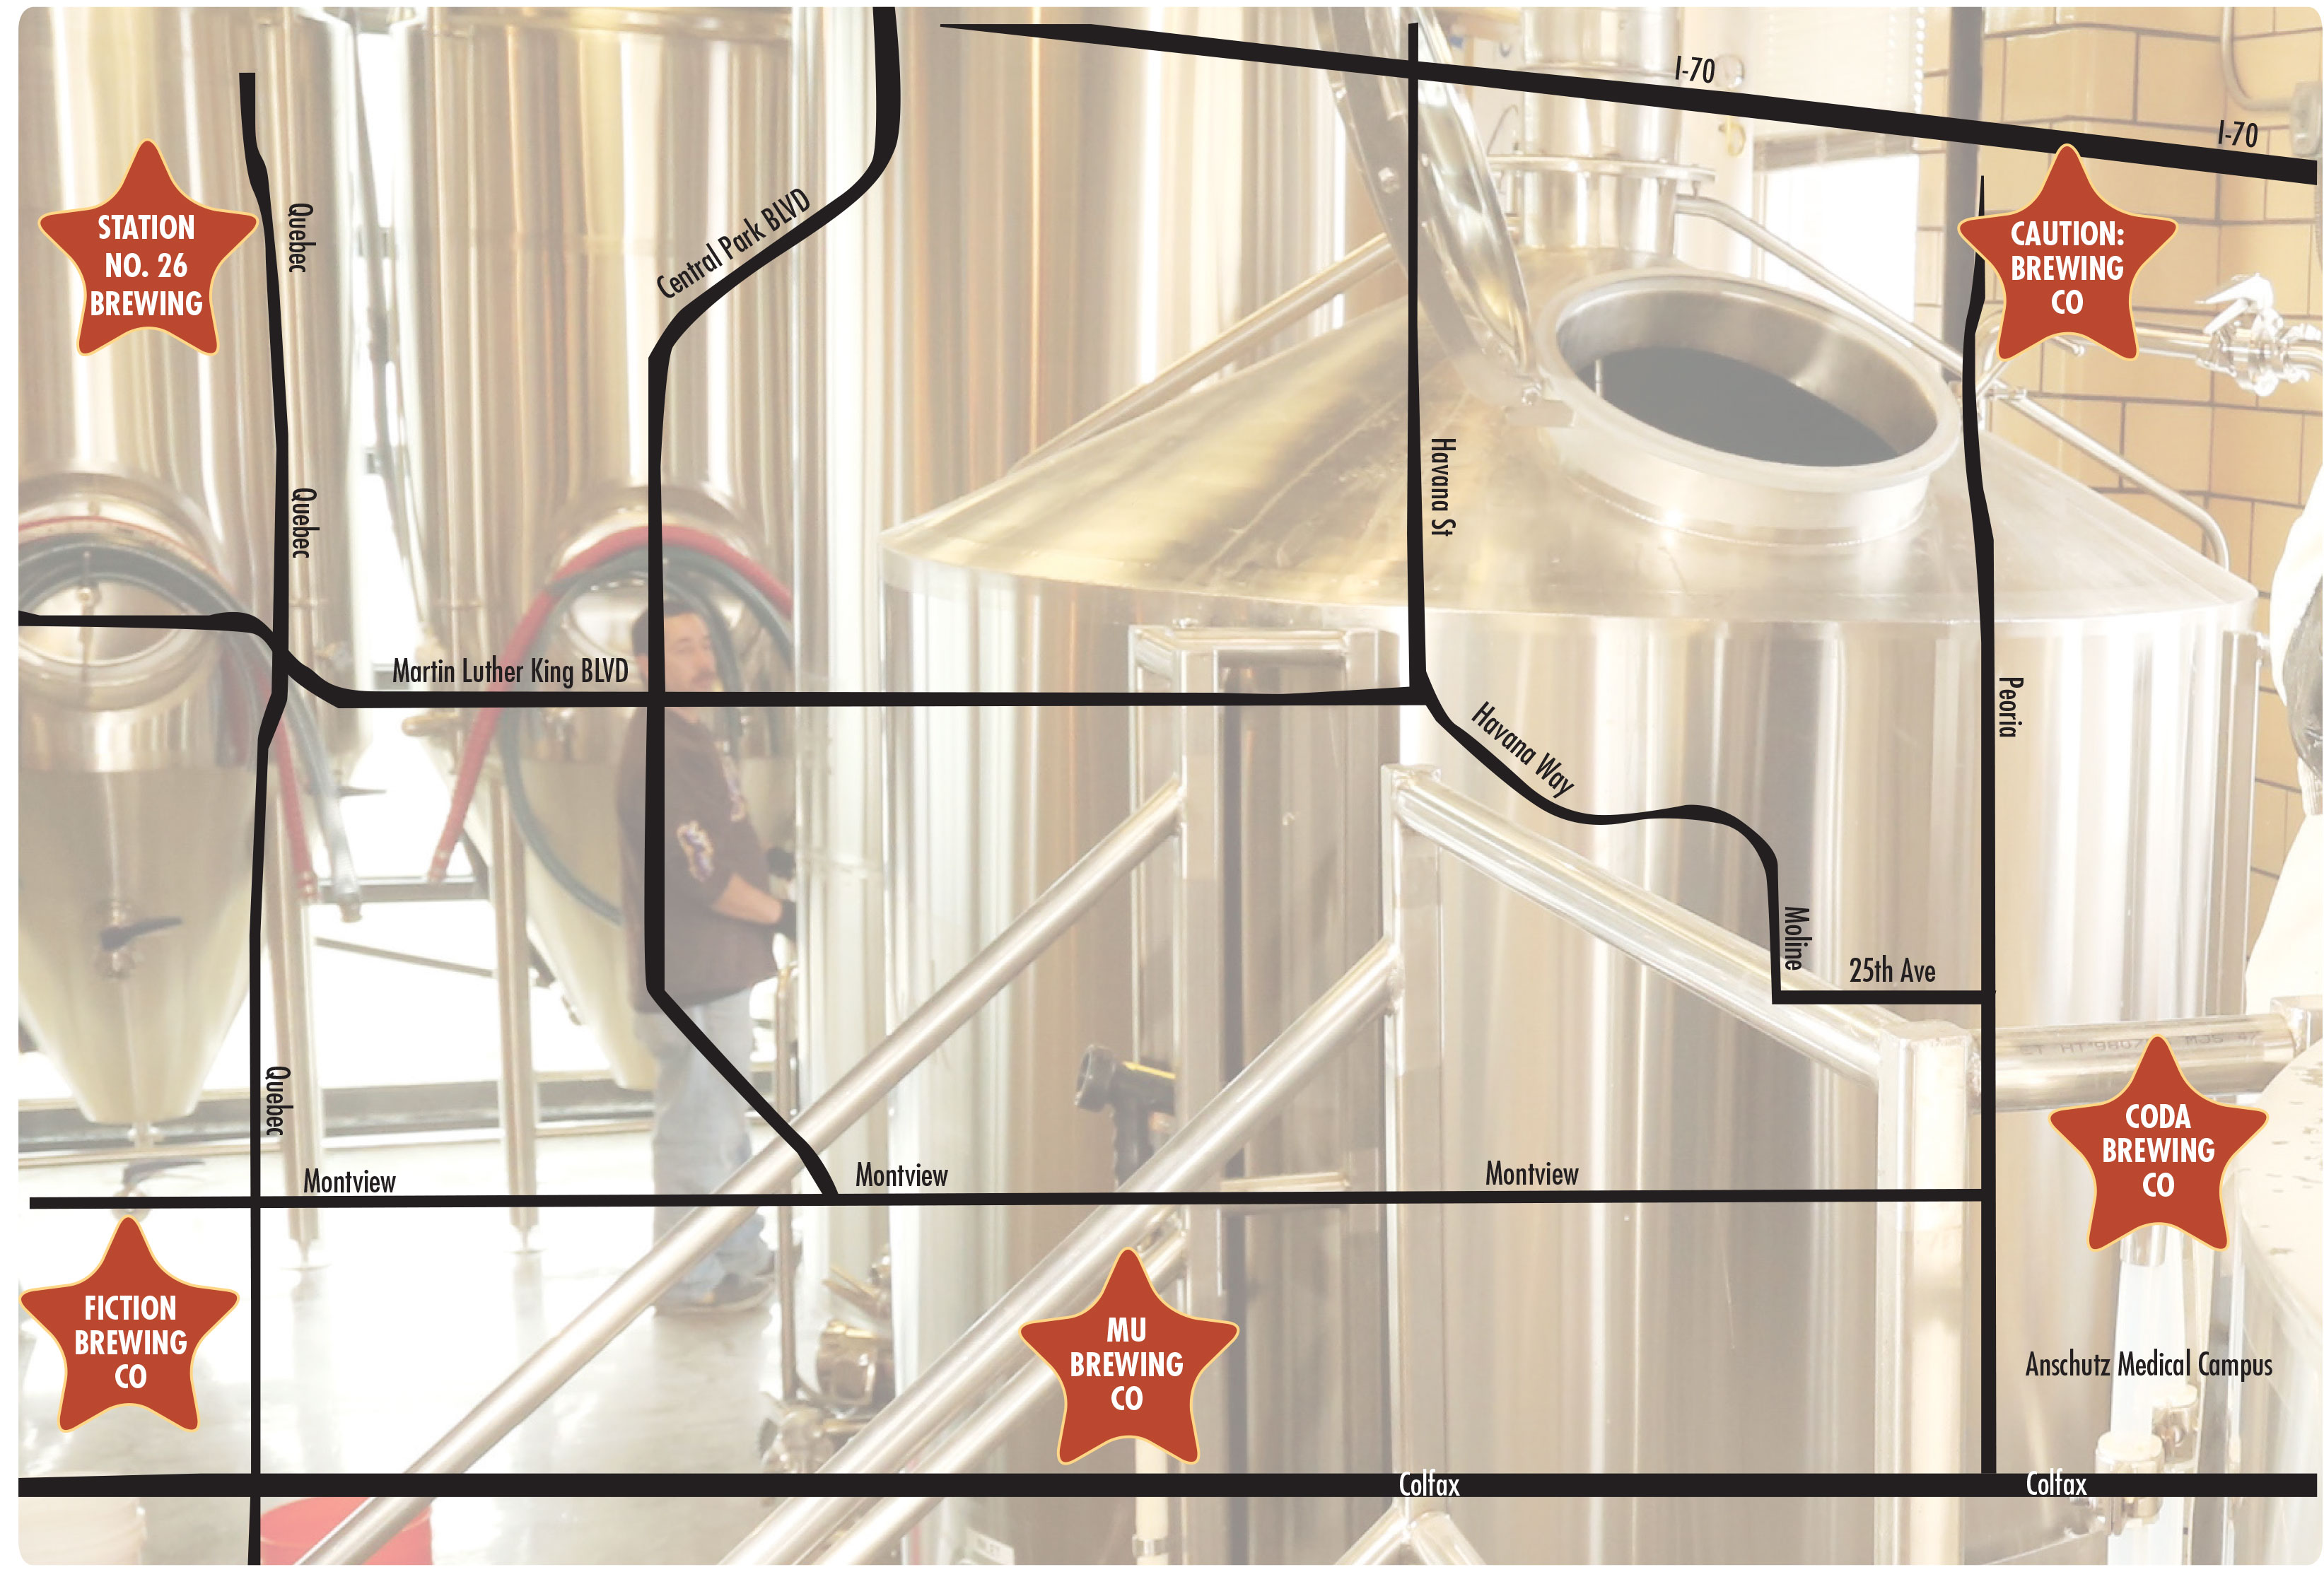 NEW-Brewery-Map